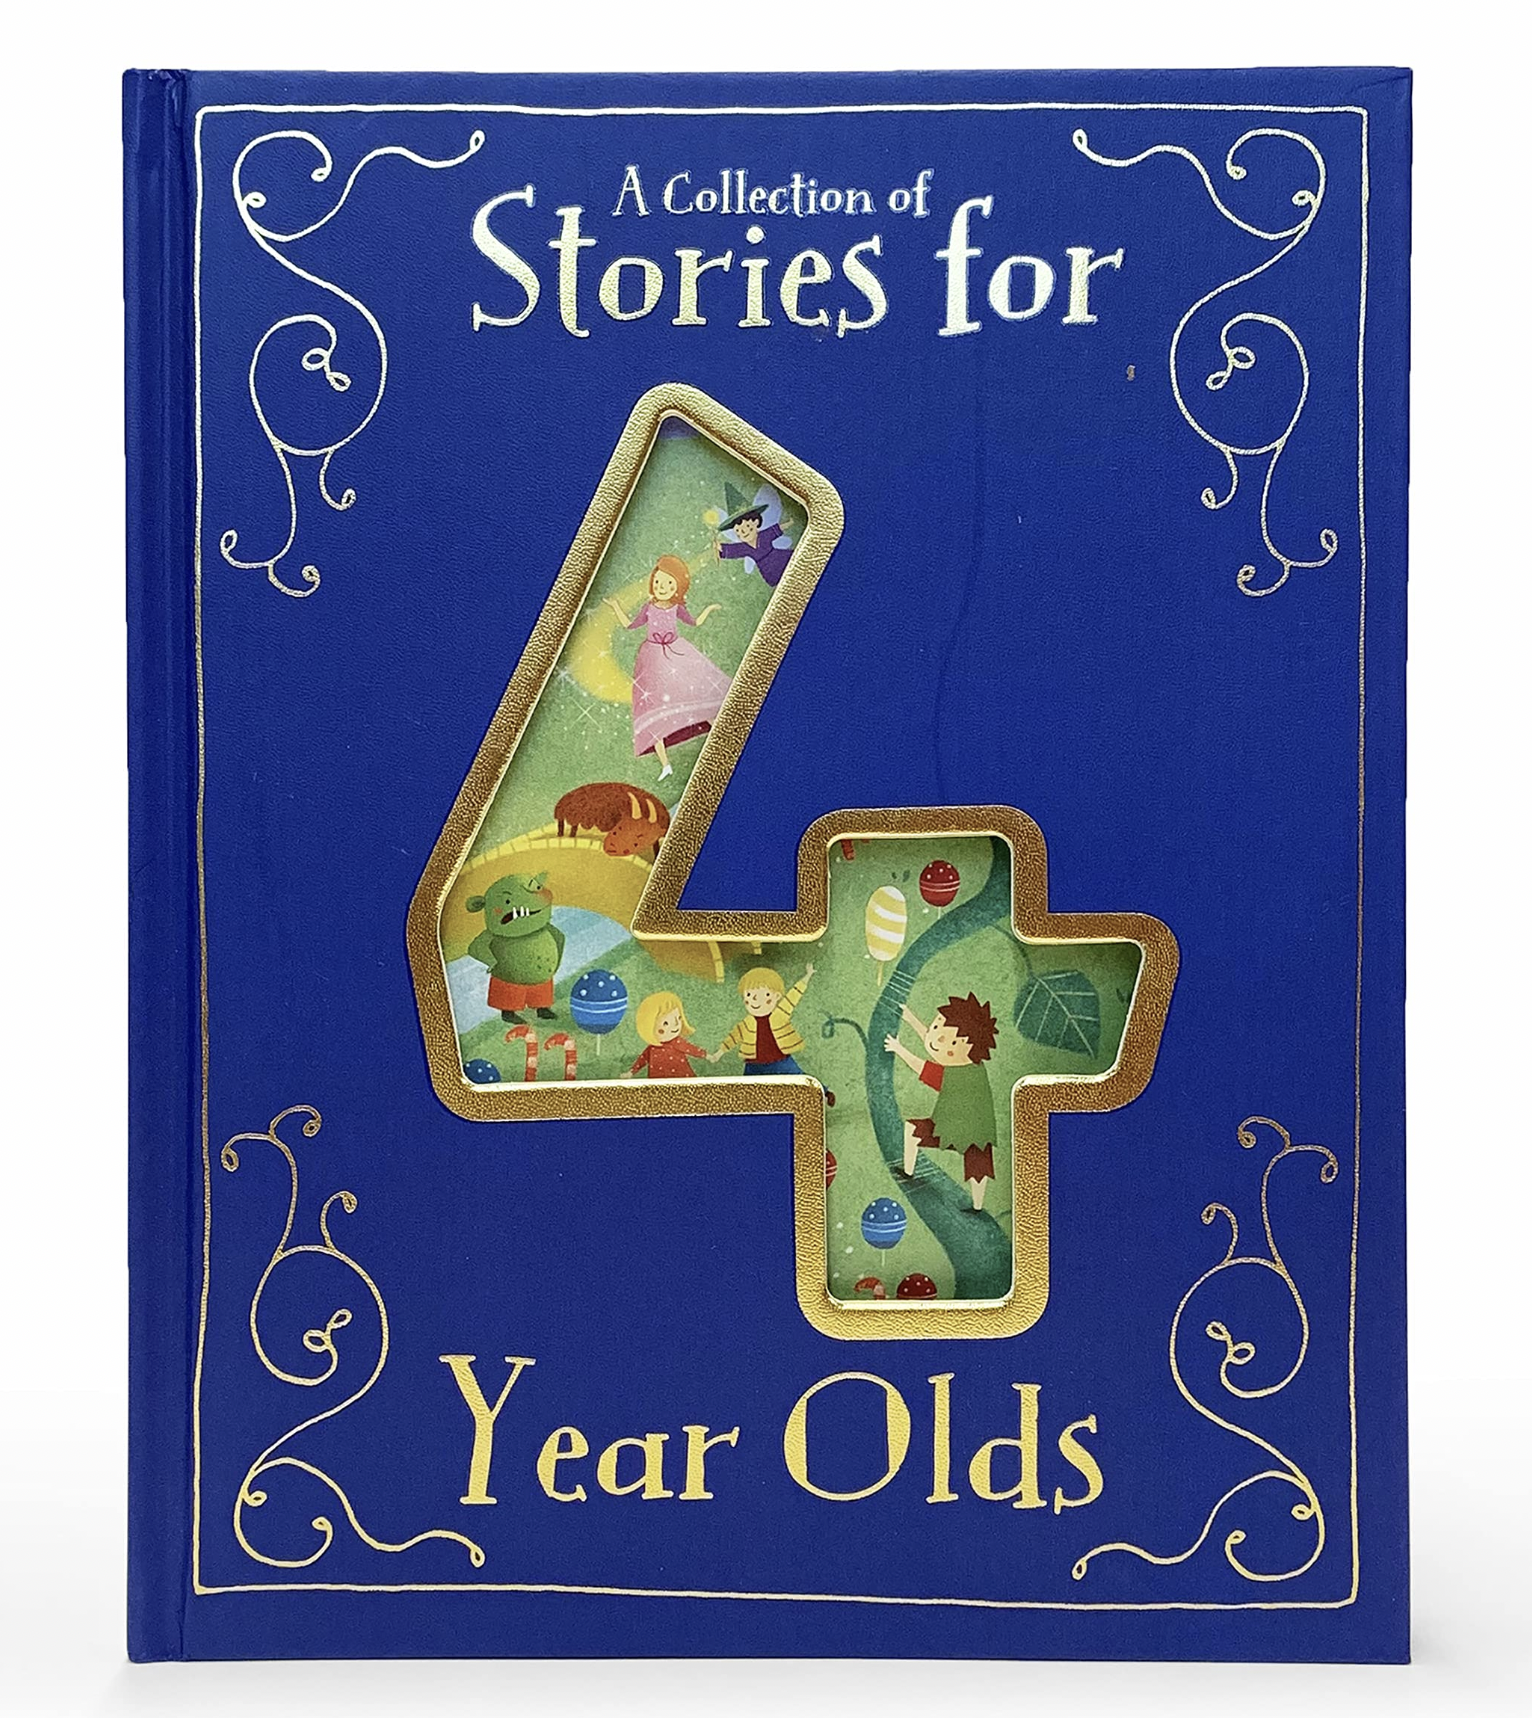 Cottage Door Press Collection of Stories For 4 Year Olds